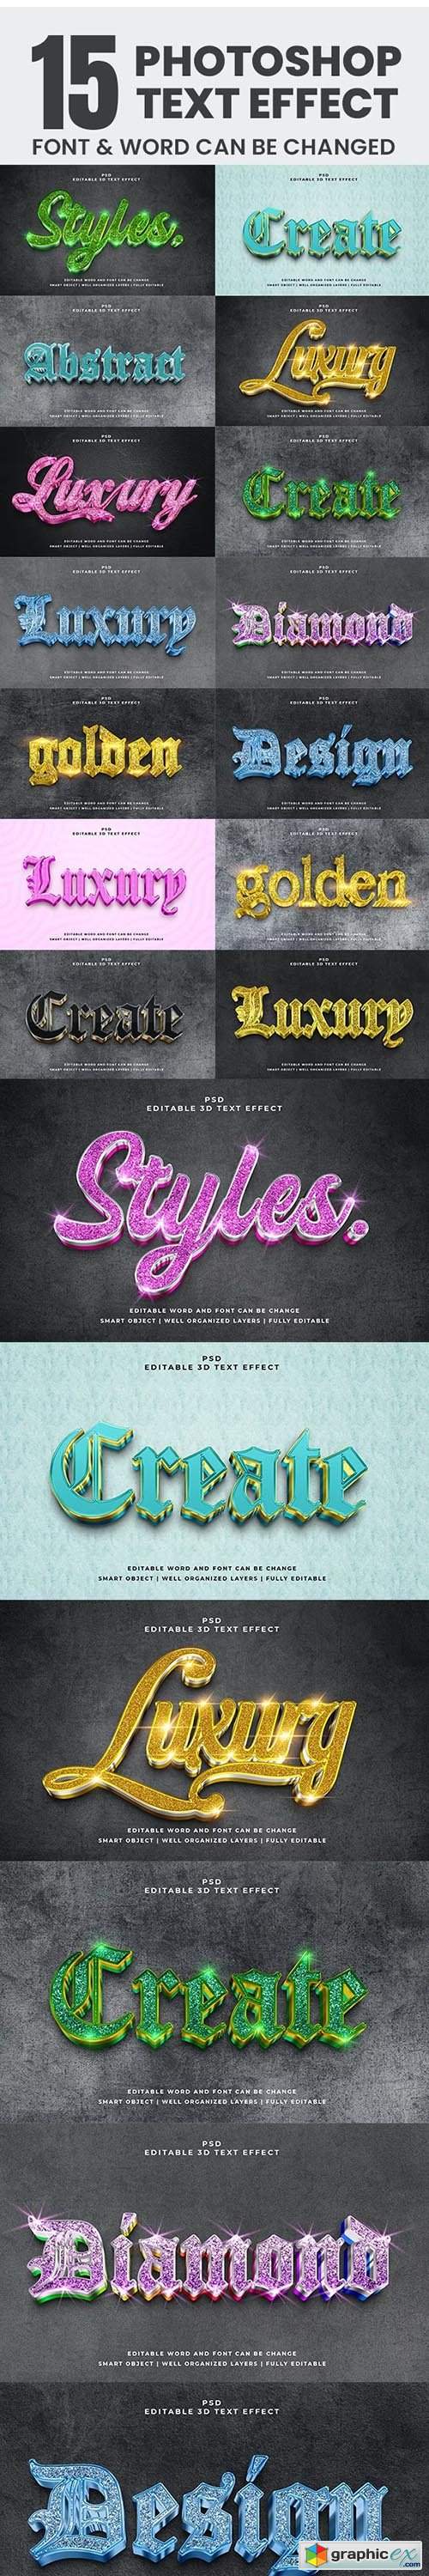 15 Photoshop Editable 3d Text Effect Style Pack 